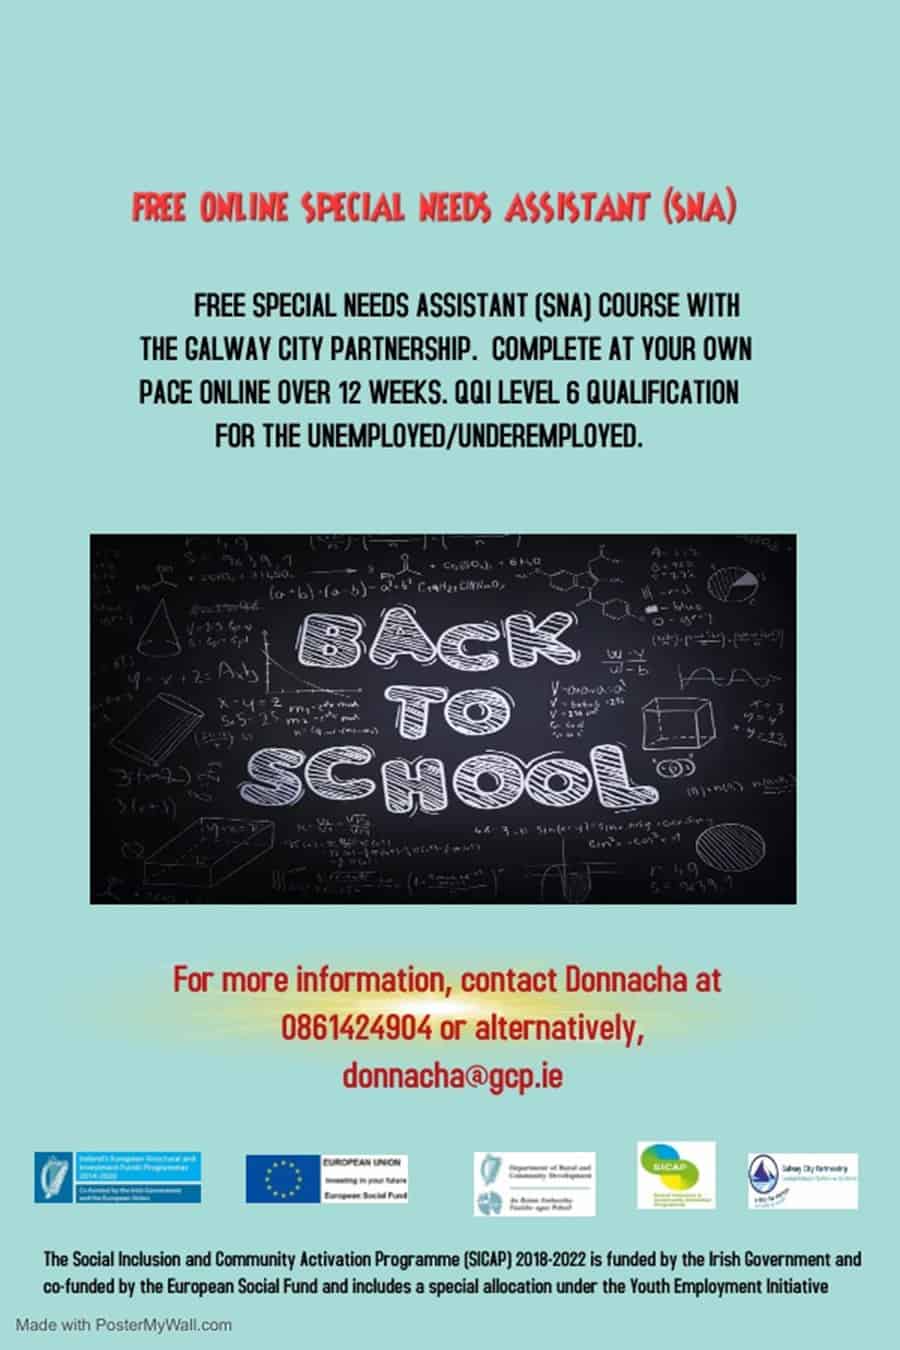 Free Online Special Needs Assistant (SNA) Course.